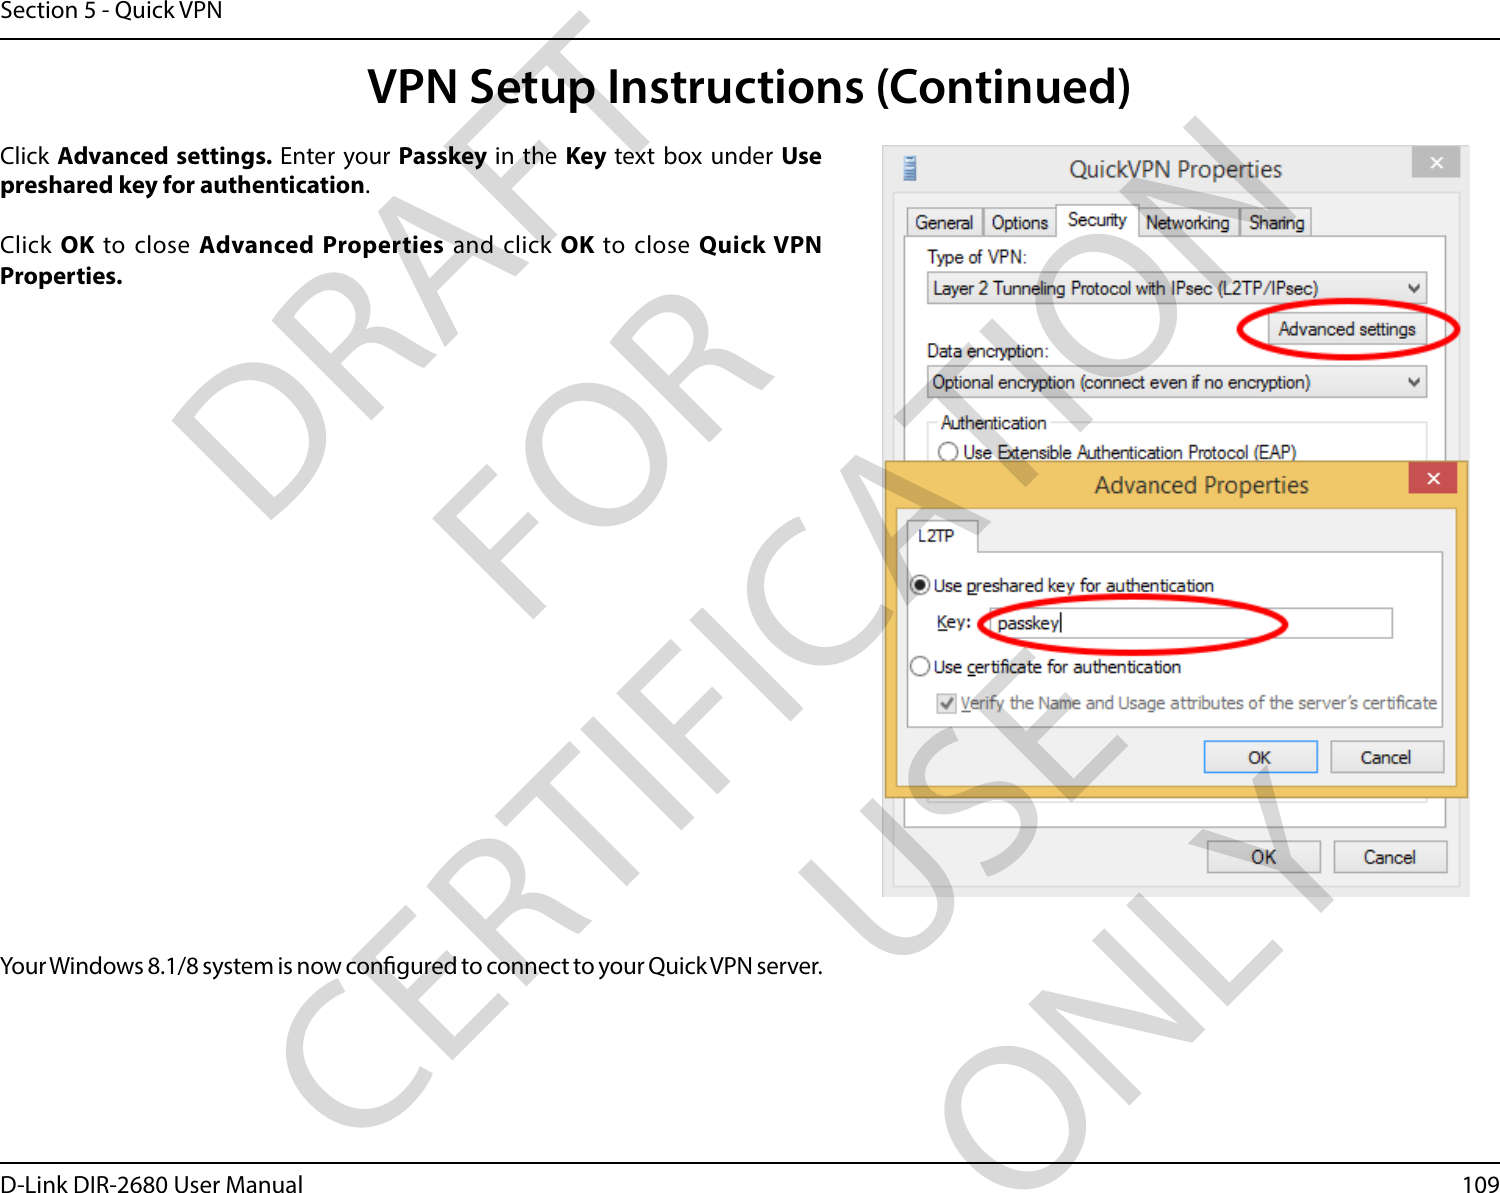 109D-Link DIR-2680 User ManualSection 5 - Quick VPNClick Advanced settings. Enter your Passkey in the Key text box under Use preshared key for authentication. Click OK to close Advanced Properties and click OK to close Quick VPN Properties.Your Windows 8.1/8 system is now congured to connect to your Quick VPN server.VPN Setup Instructions (Continued)DRAFT FOR CERTIFICATION USE ONLY